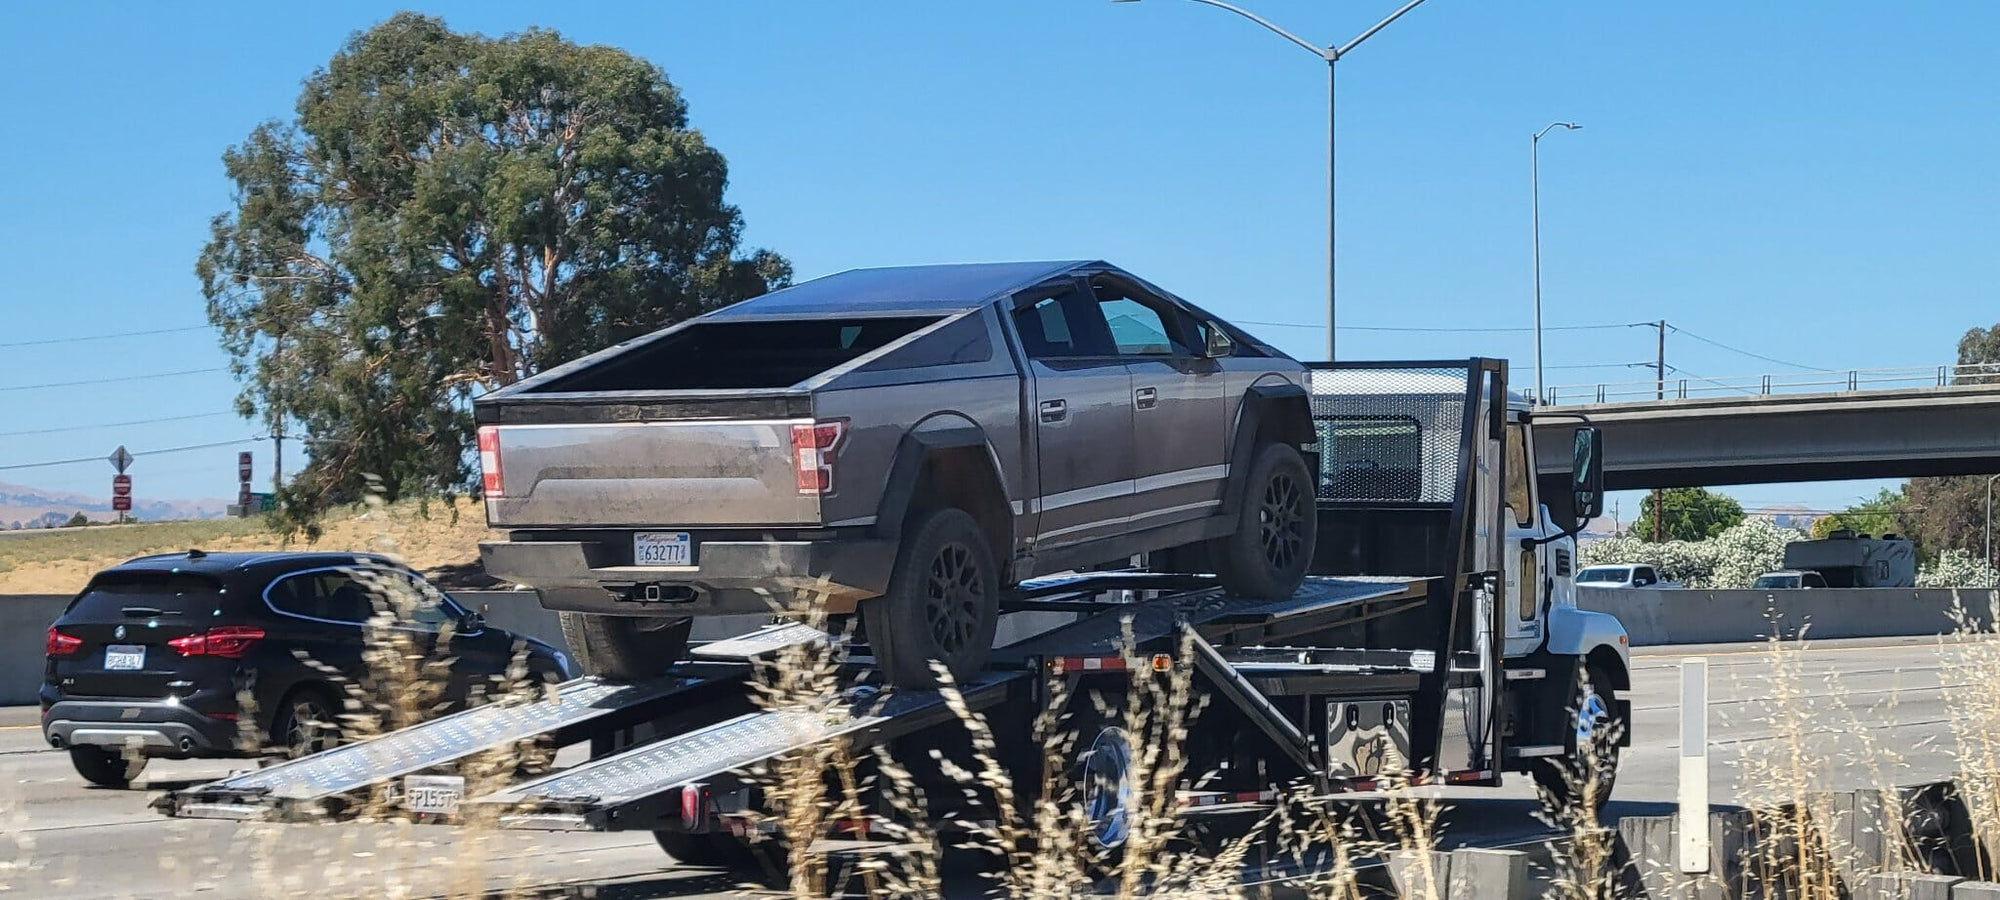 The First Production Model of Tesla's Cybertruck Is an F-150 in Disguise.